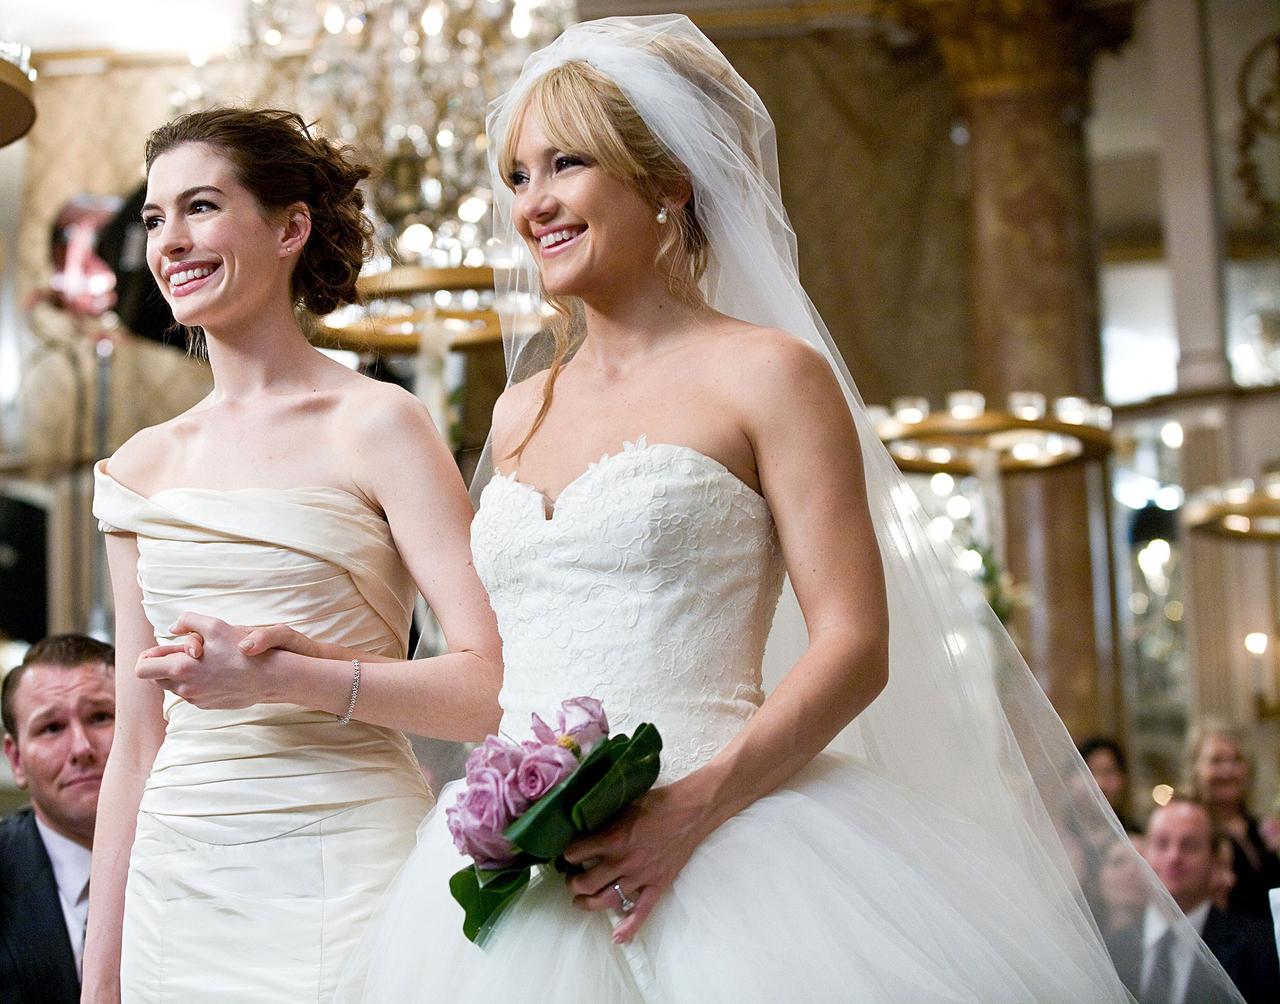 12 Wedding Movies Every Bride Must Watch Before the D-day